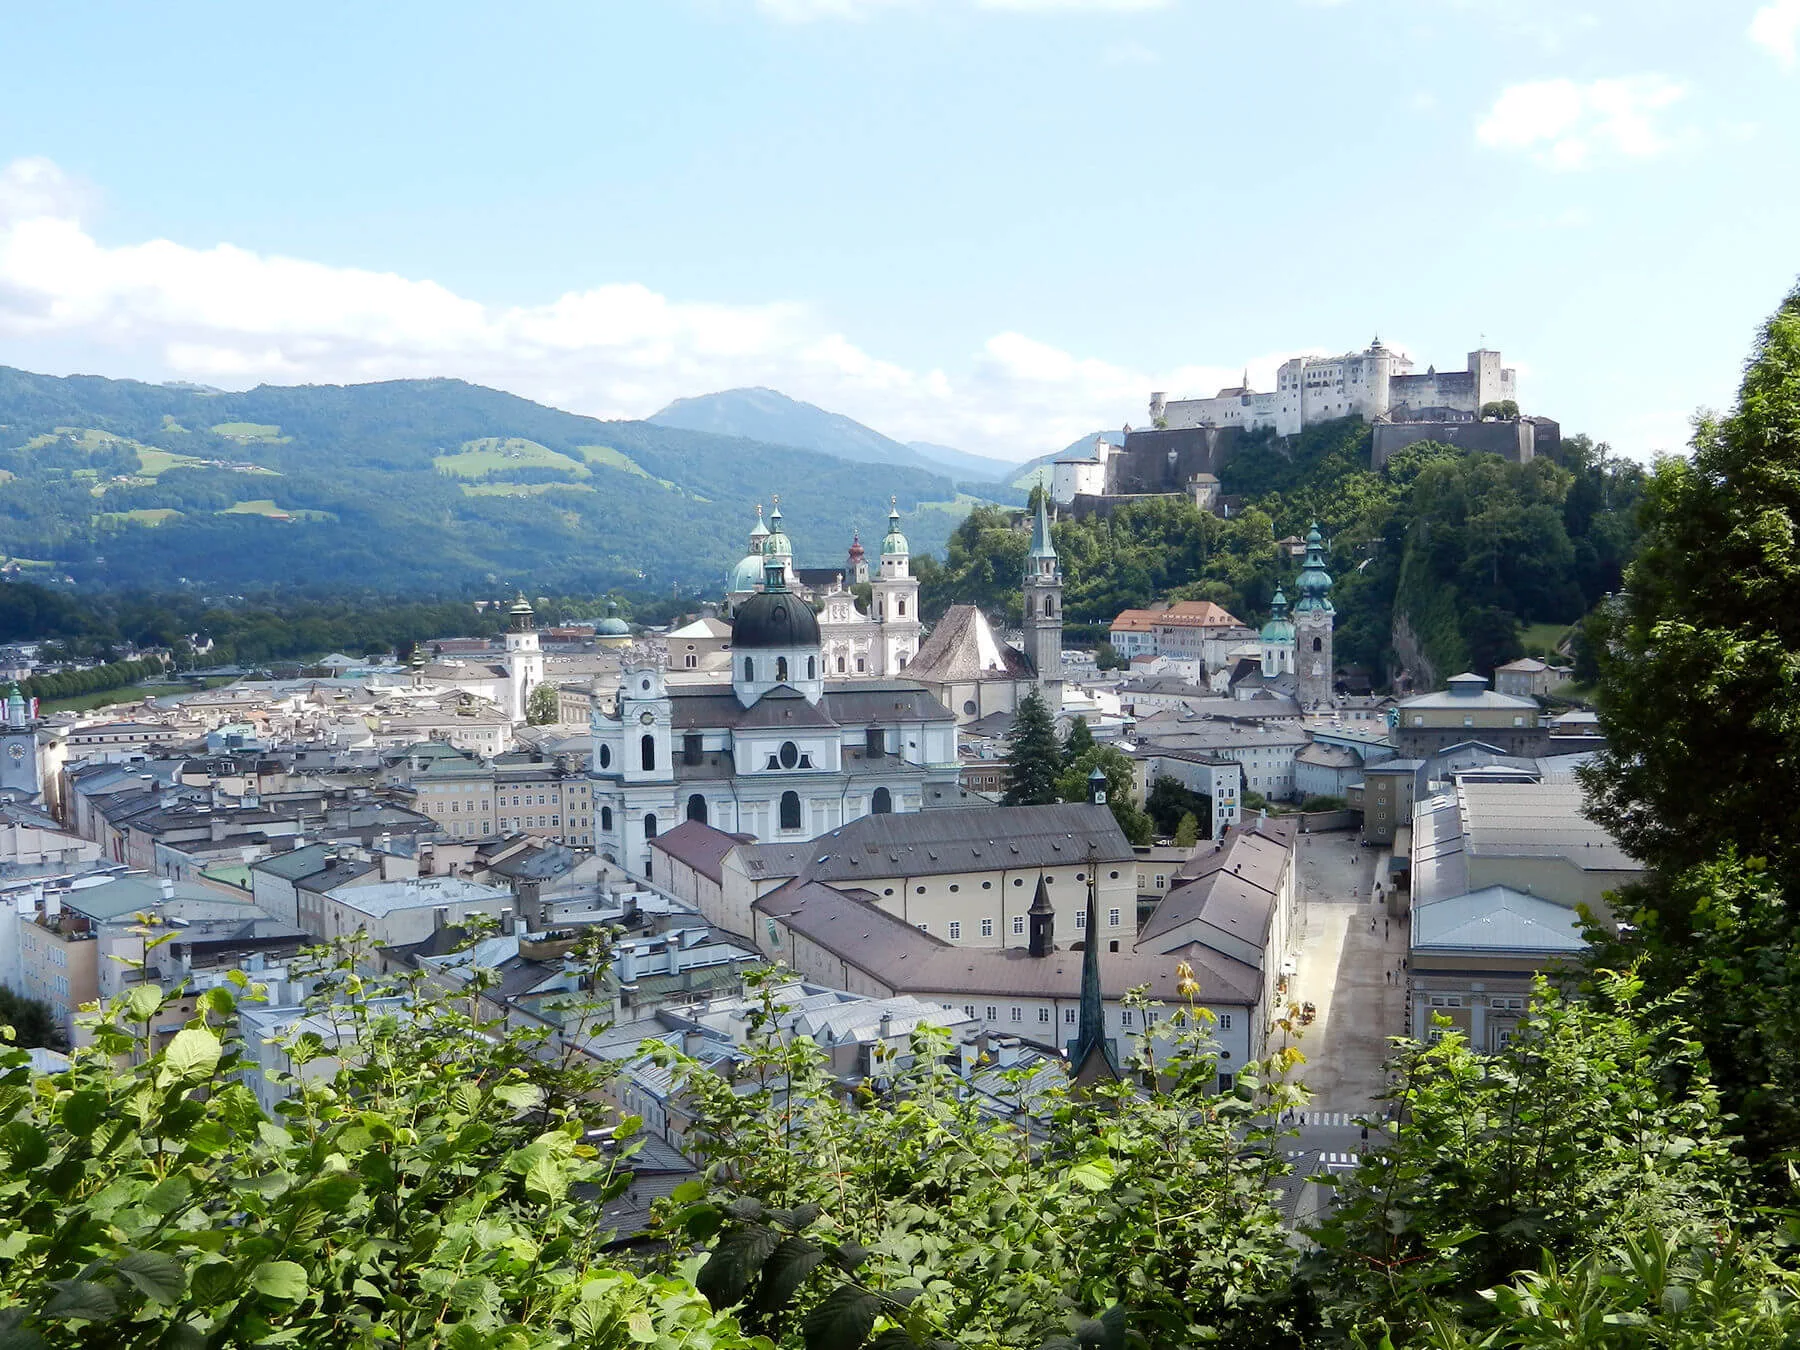 With a charmingly preserved Old Town, splendid gardens, and Baroque churches, Salzburg feels made for tourism